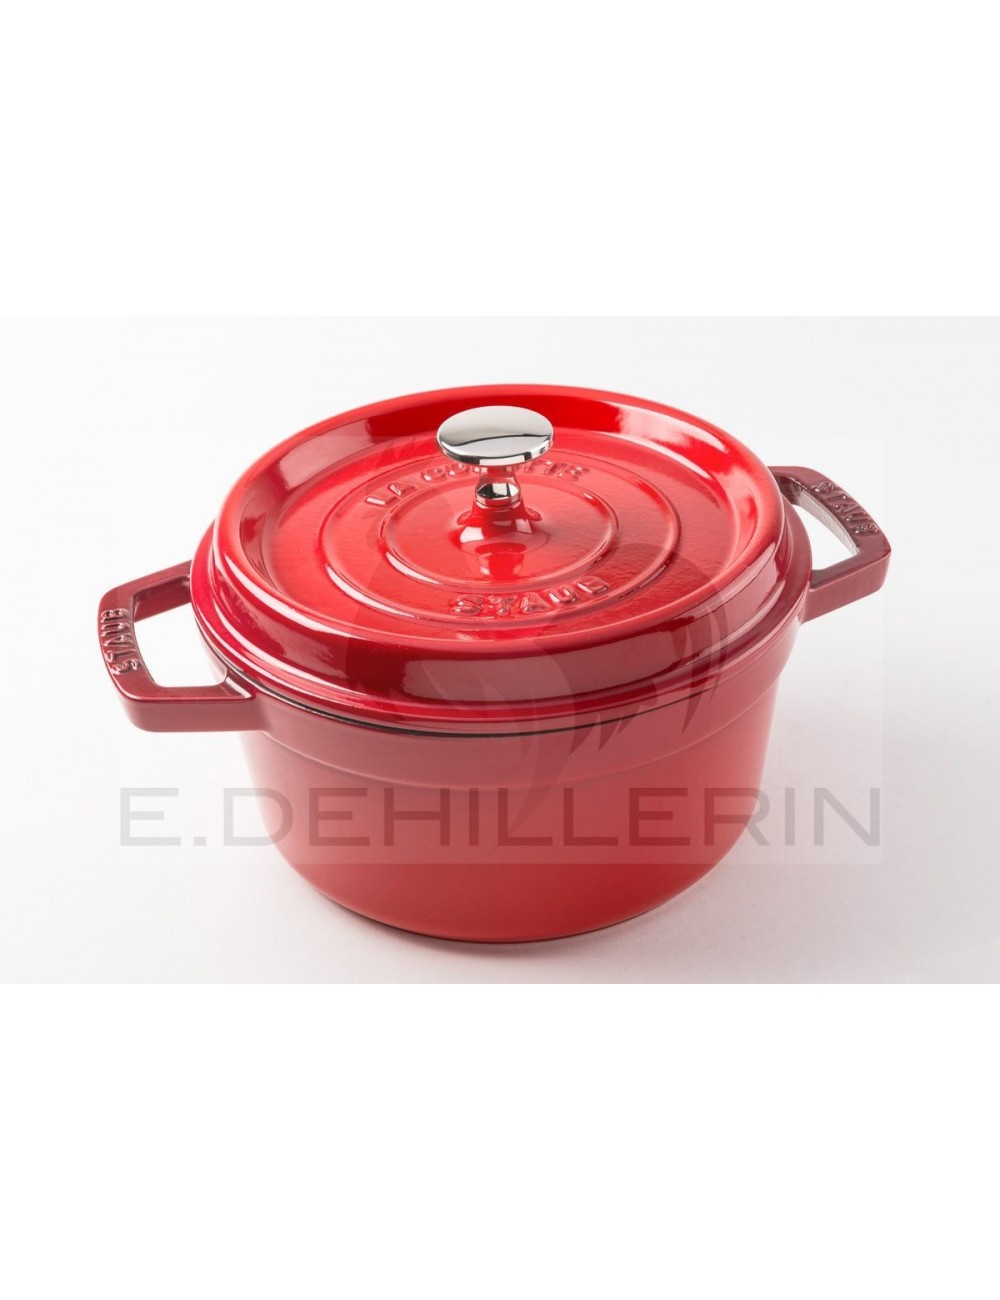 2-in-1 Enameled Cast Iron Cocotte Double Braiser Pan with Grill